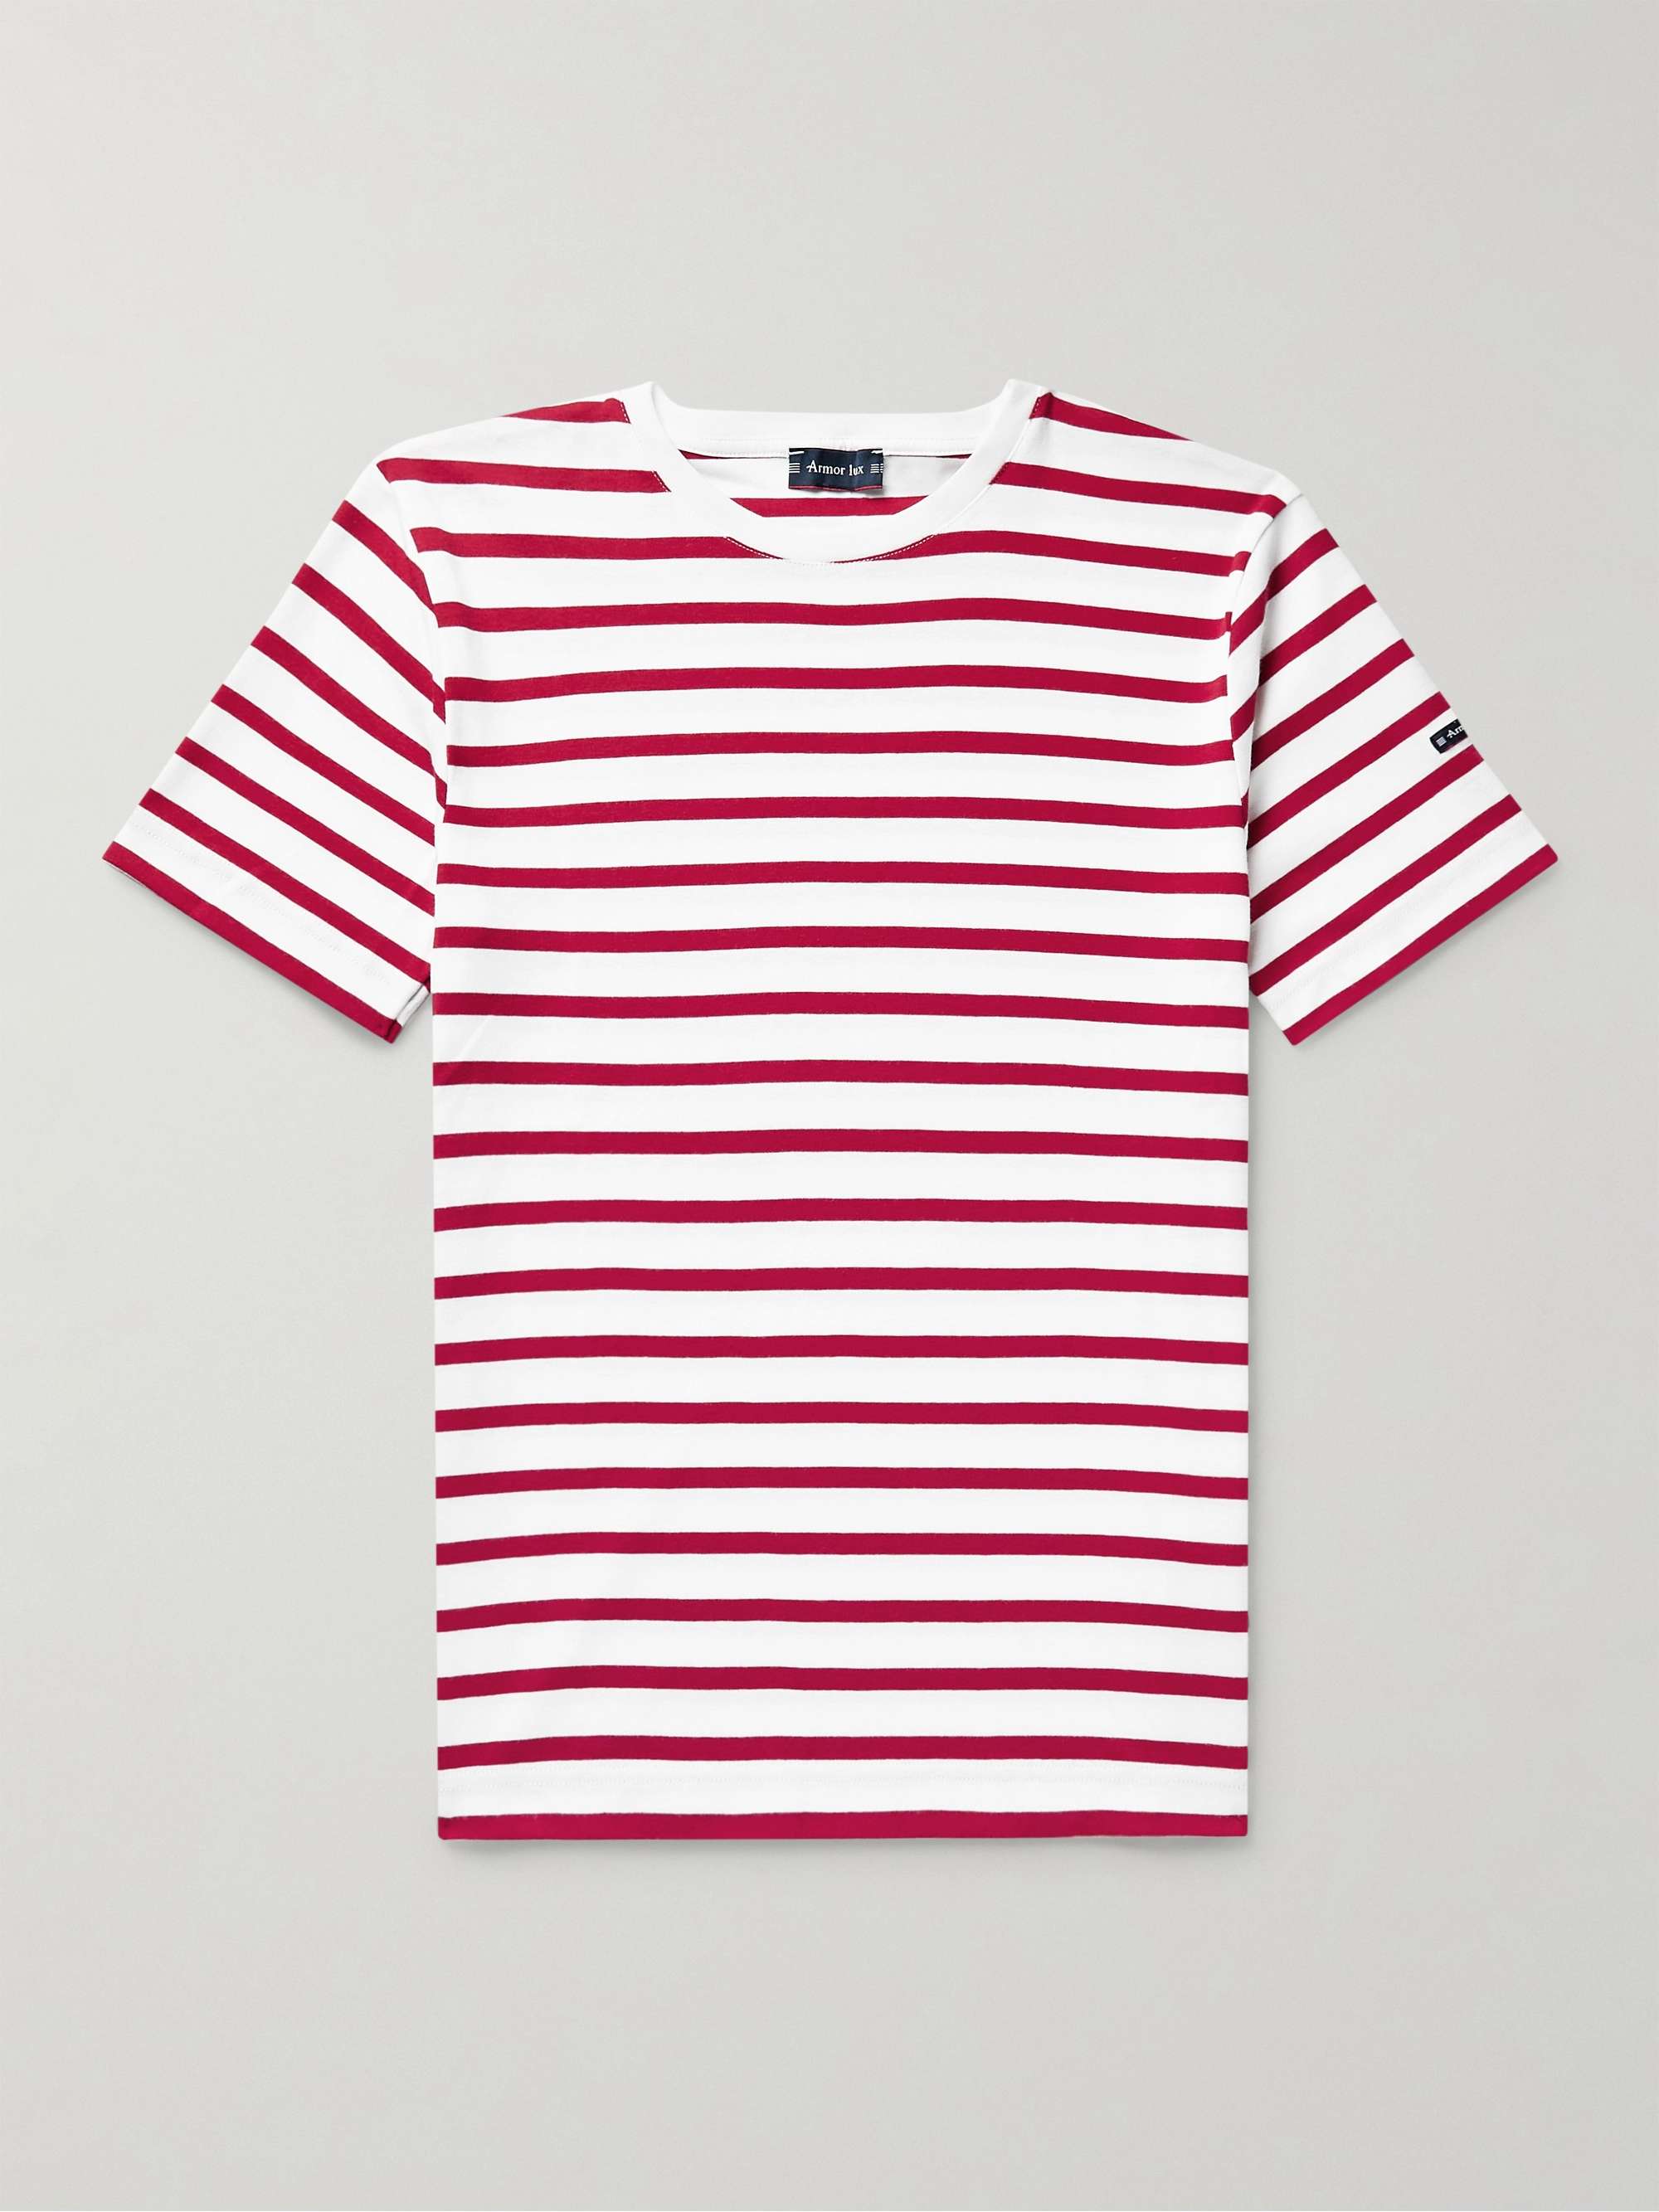 Red Slim-Fit Striped Cotton-Jersey T-Shirt | ARMOR-LUX | MR PORTER